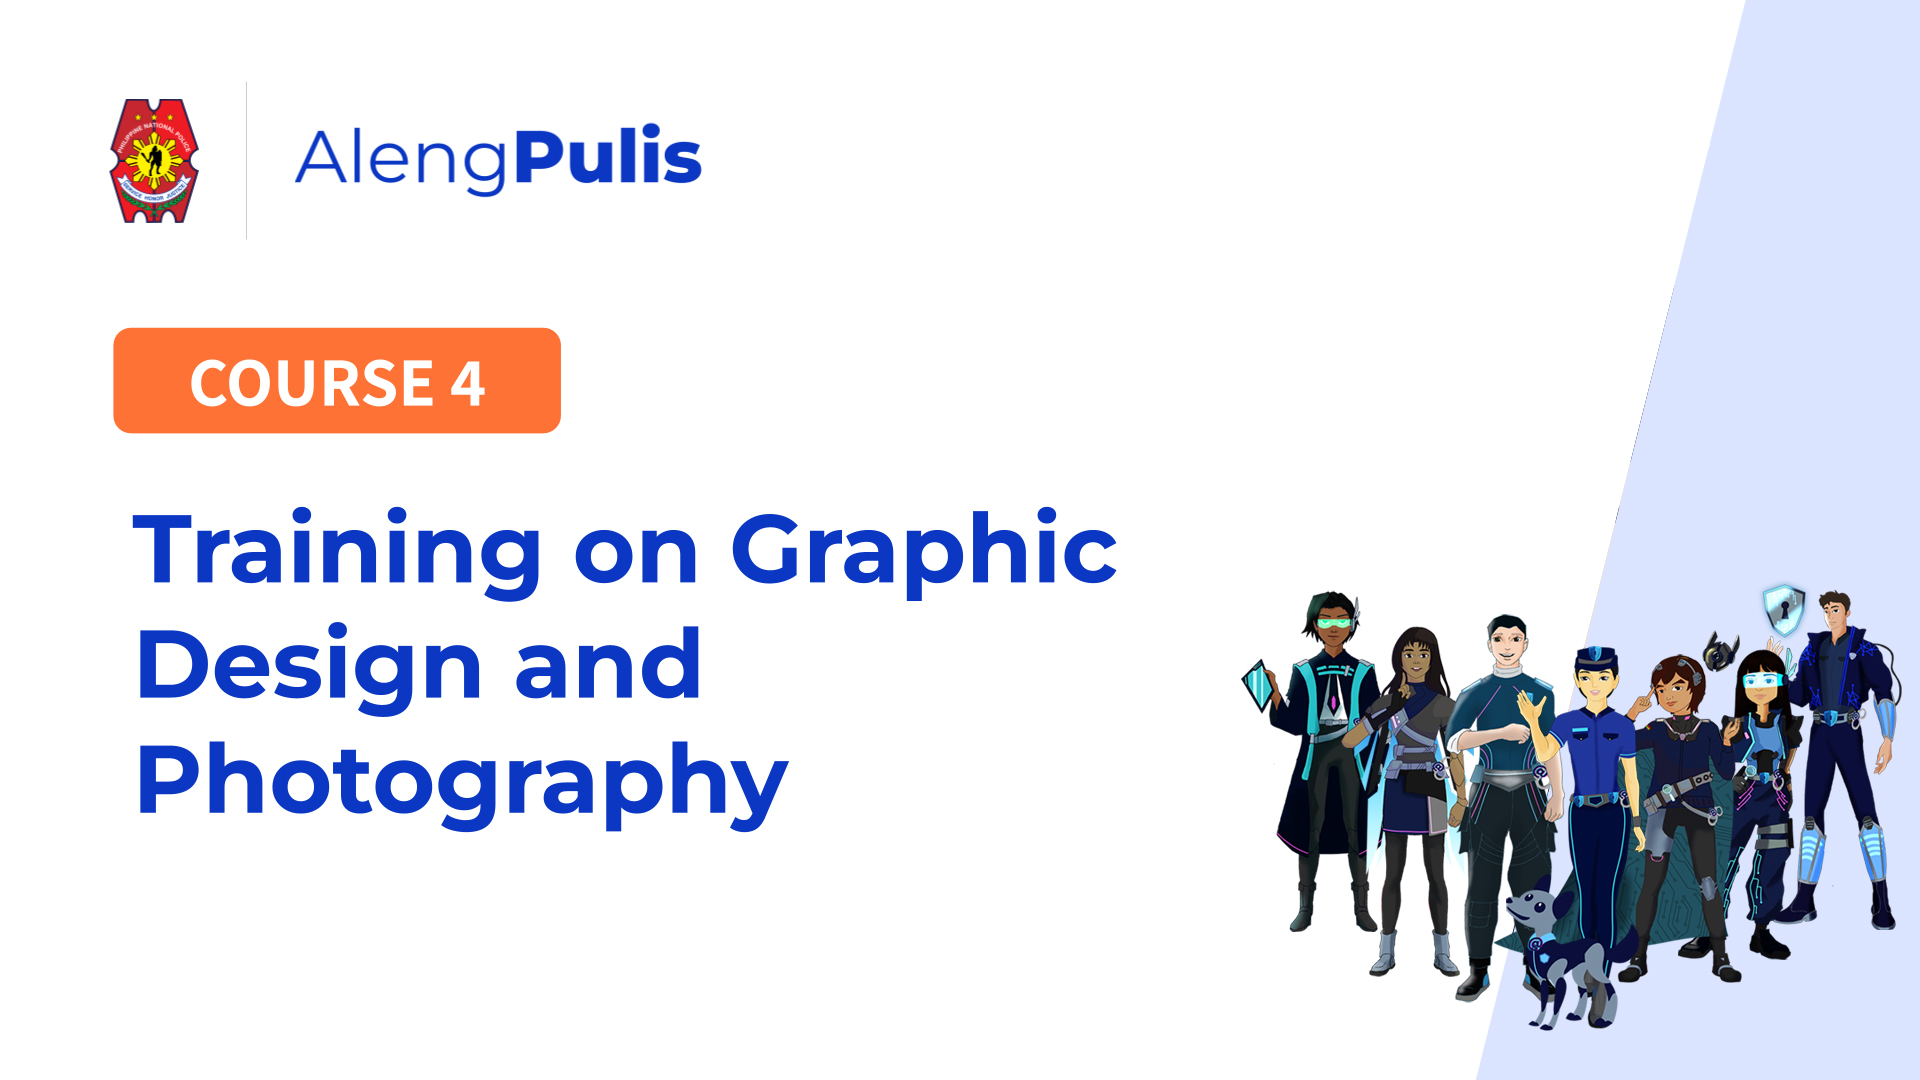 Training on Graphic Design and Photography